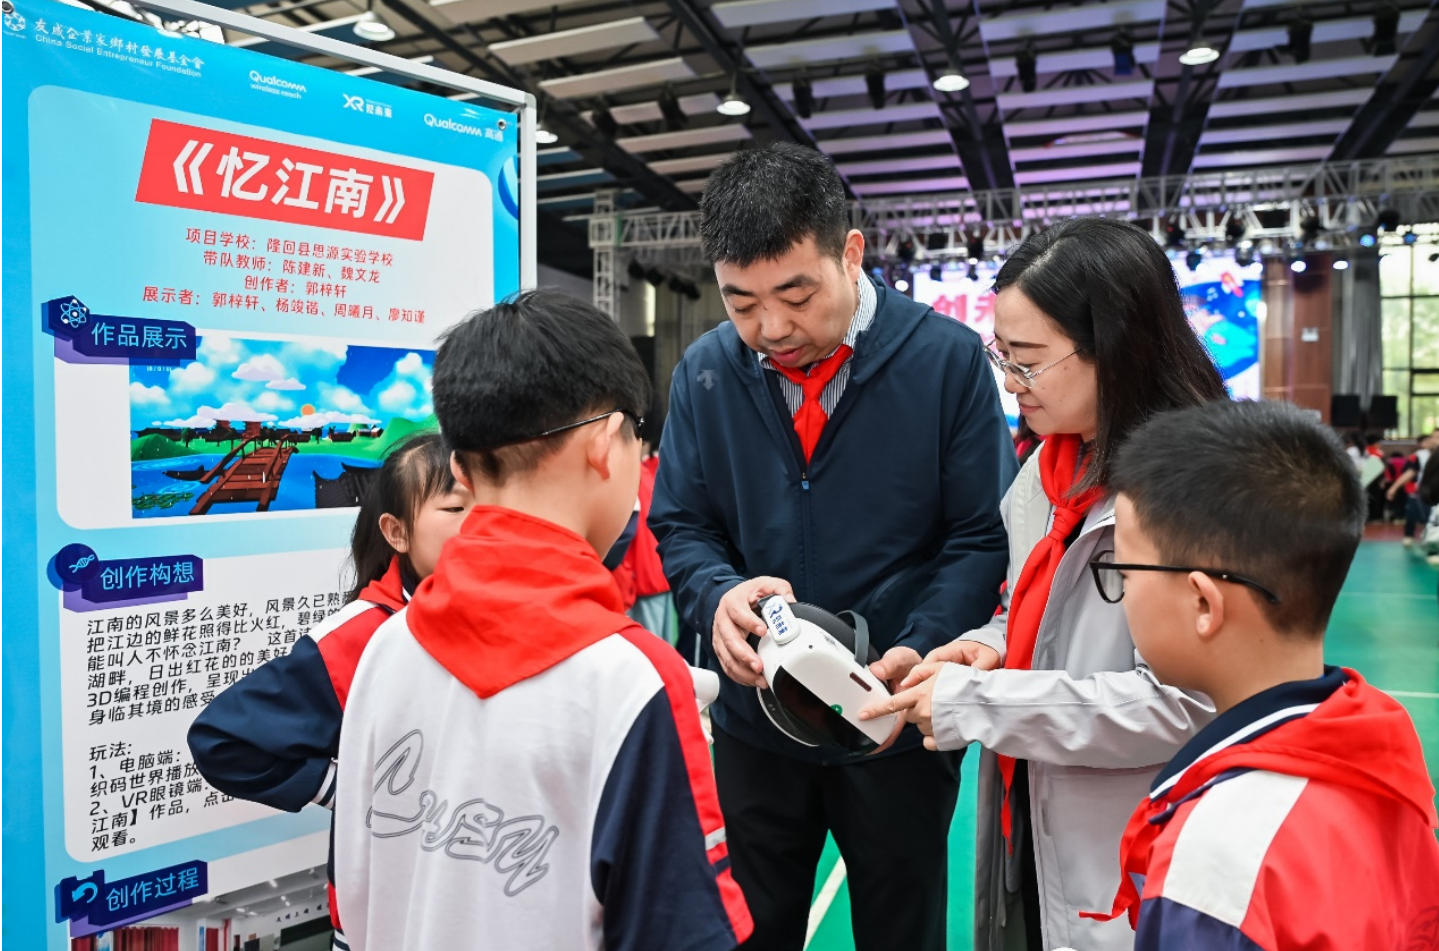  Technology fairs foster digital creativity, and Qualcomm supports the development of rural science and technology education